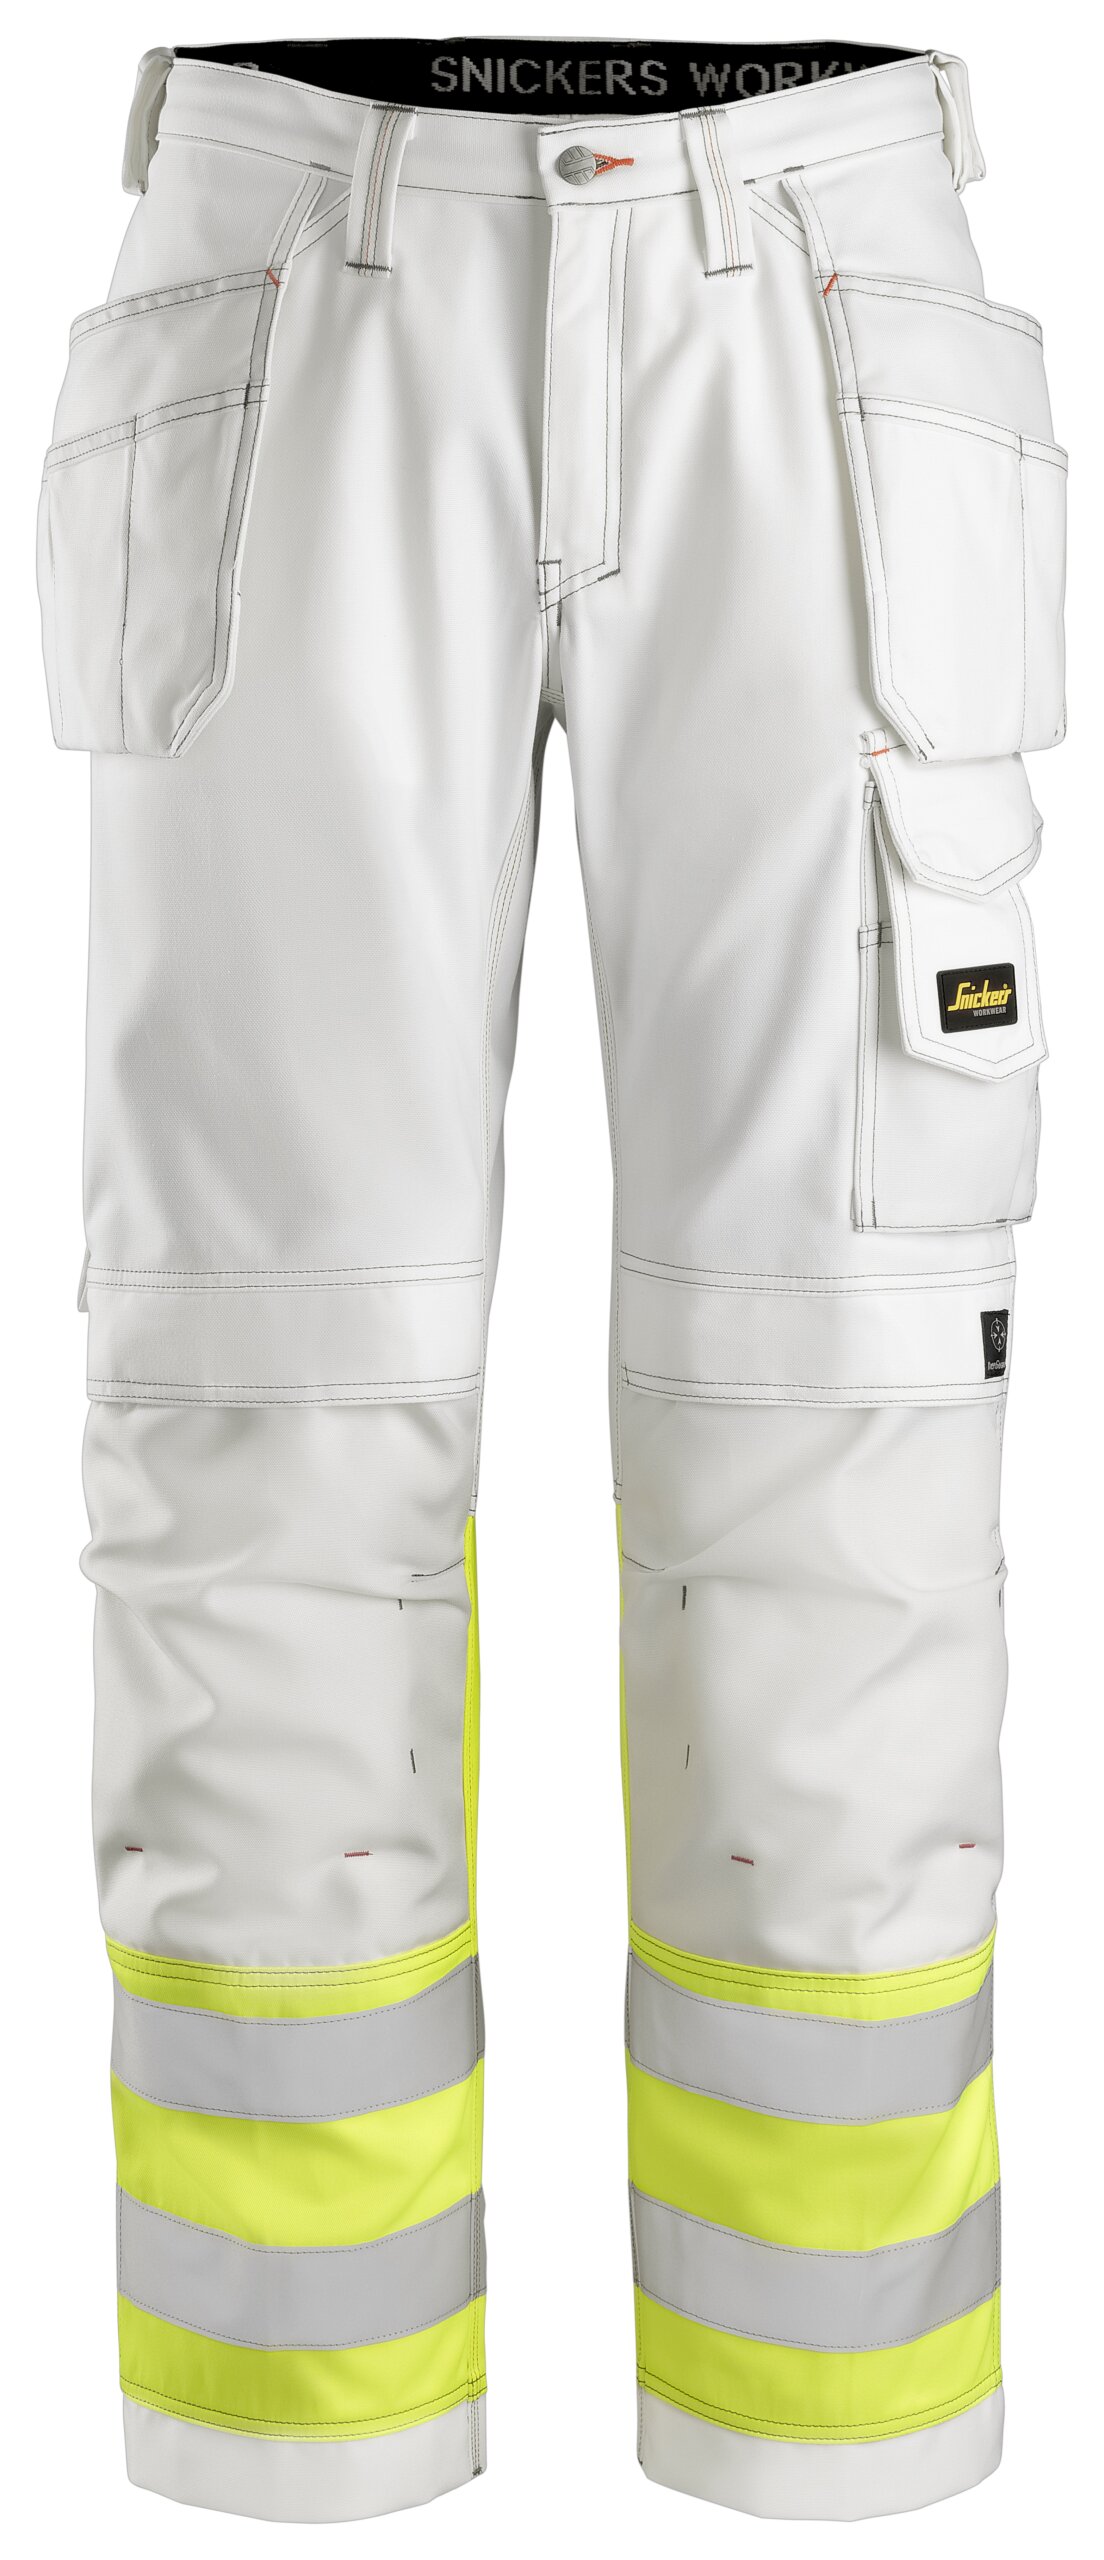 6743 Snickers HighVis Womens Stretch Trousers with Holster Pockets O   Tradeworx Online